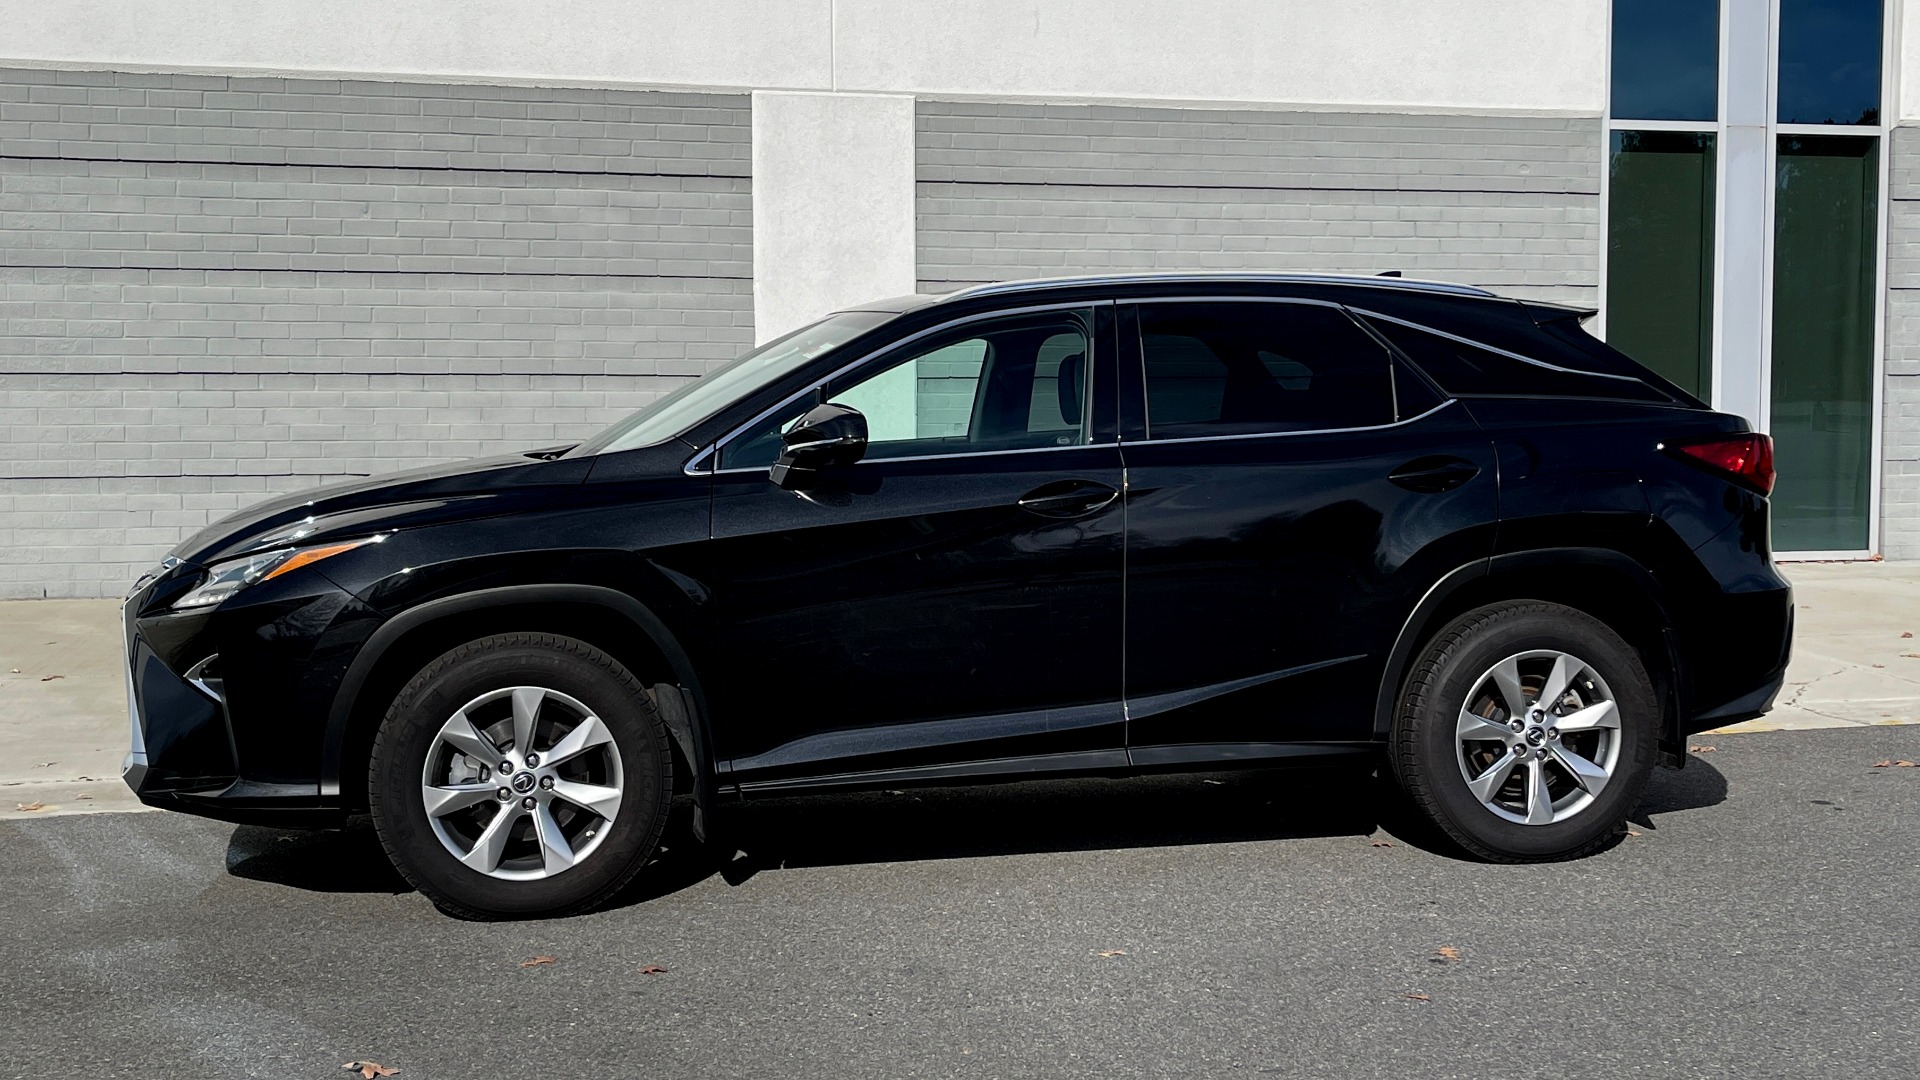 Used 2019 Lexus RX 350 3.5L SUV / AWD / SUNROOF / 18IN WHEELS / REARVIEW for sale $45,595 at Formula Imports in Charlotte NC 28227 3